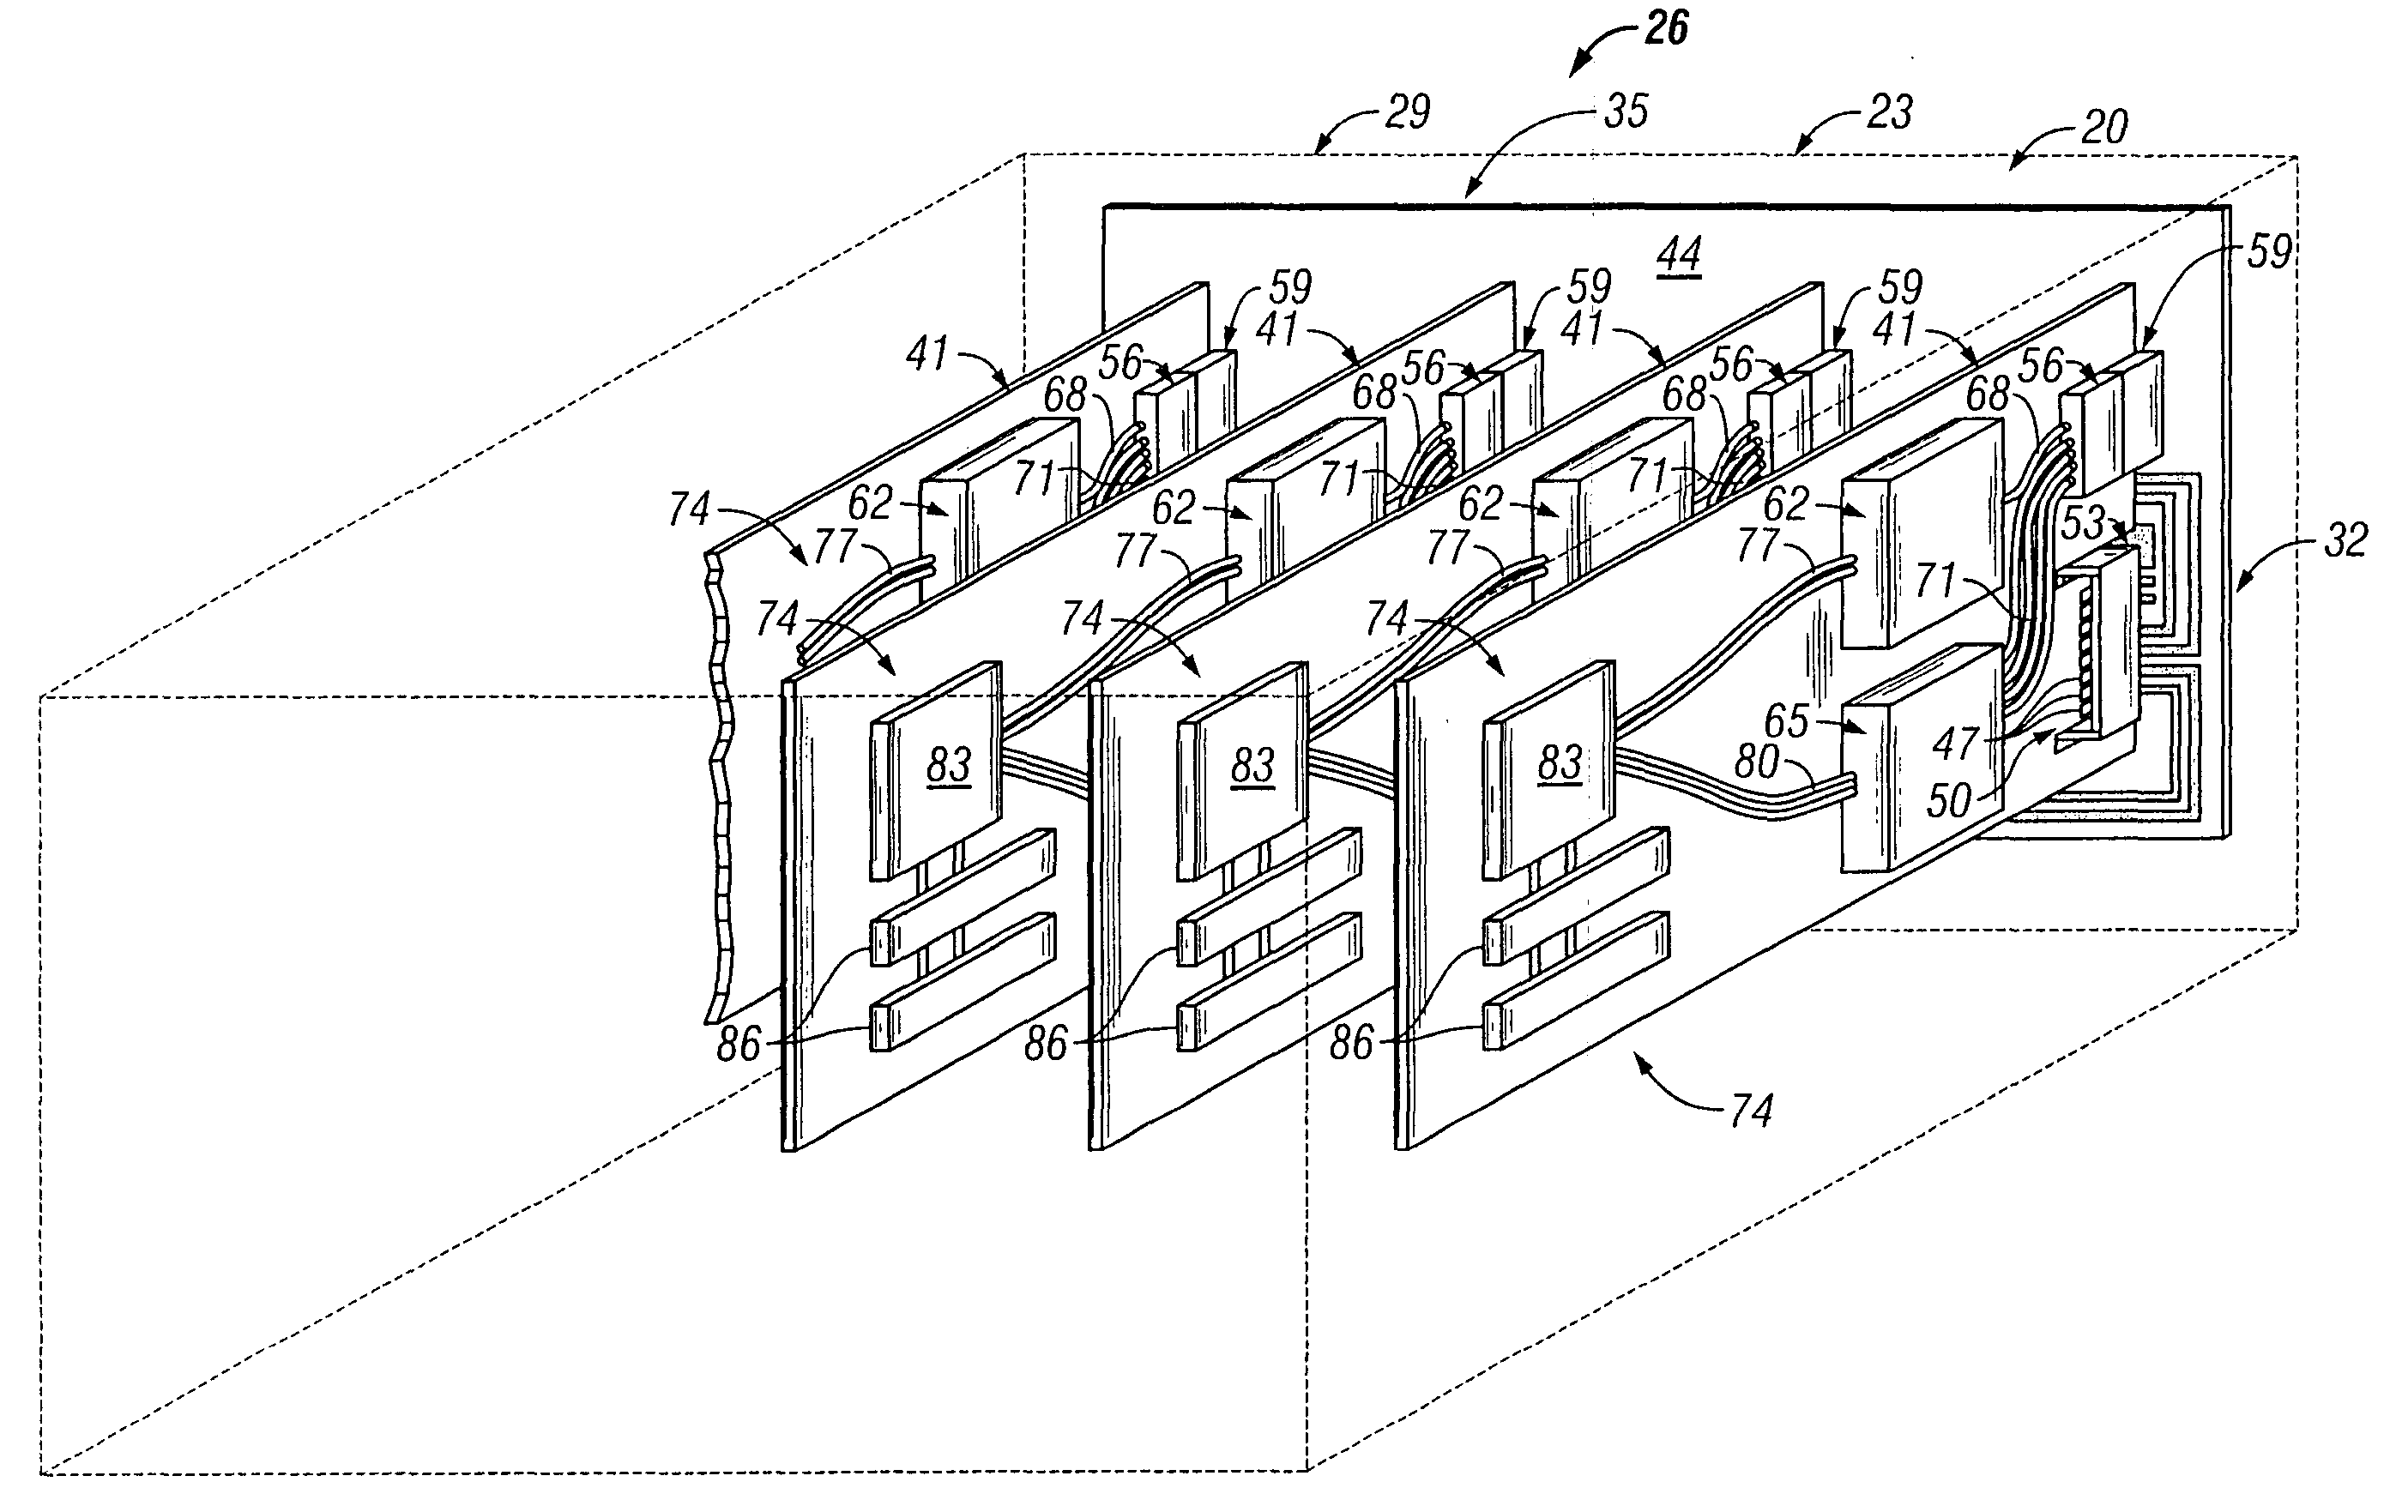 Optical interconnect system and method of communications over an optical backplane